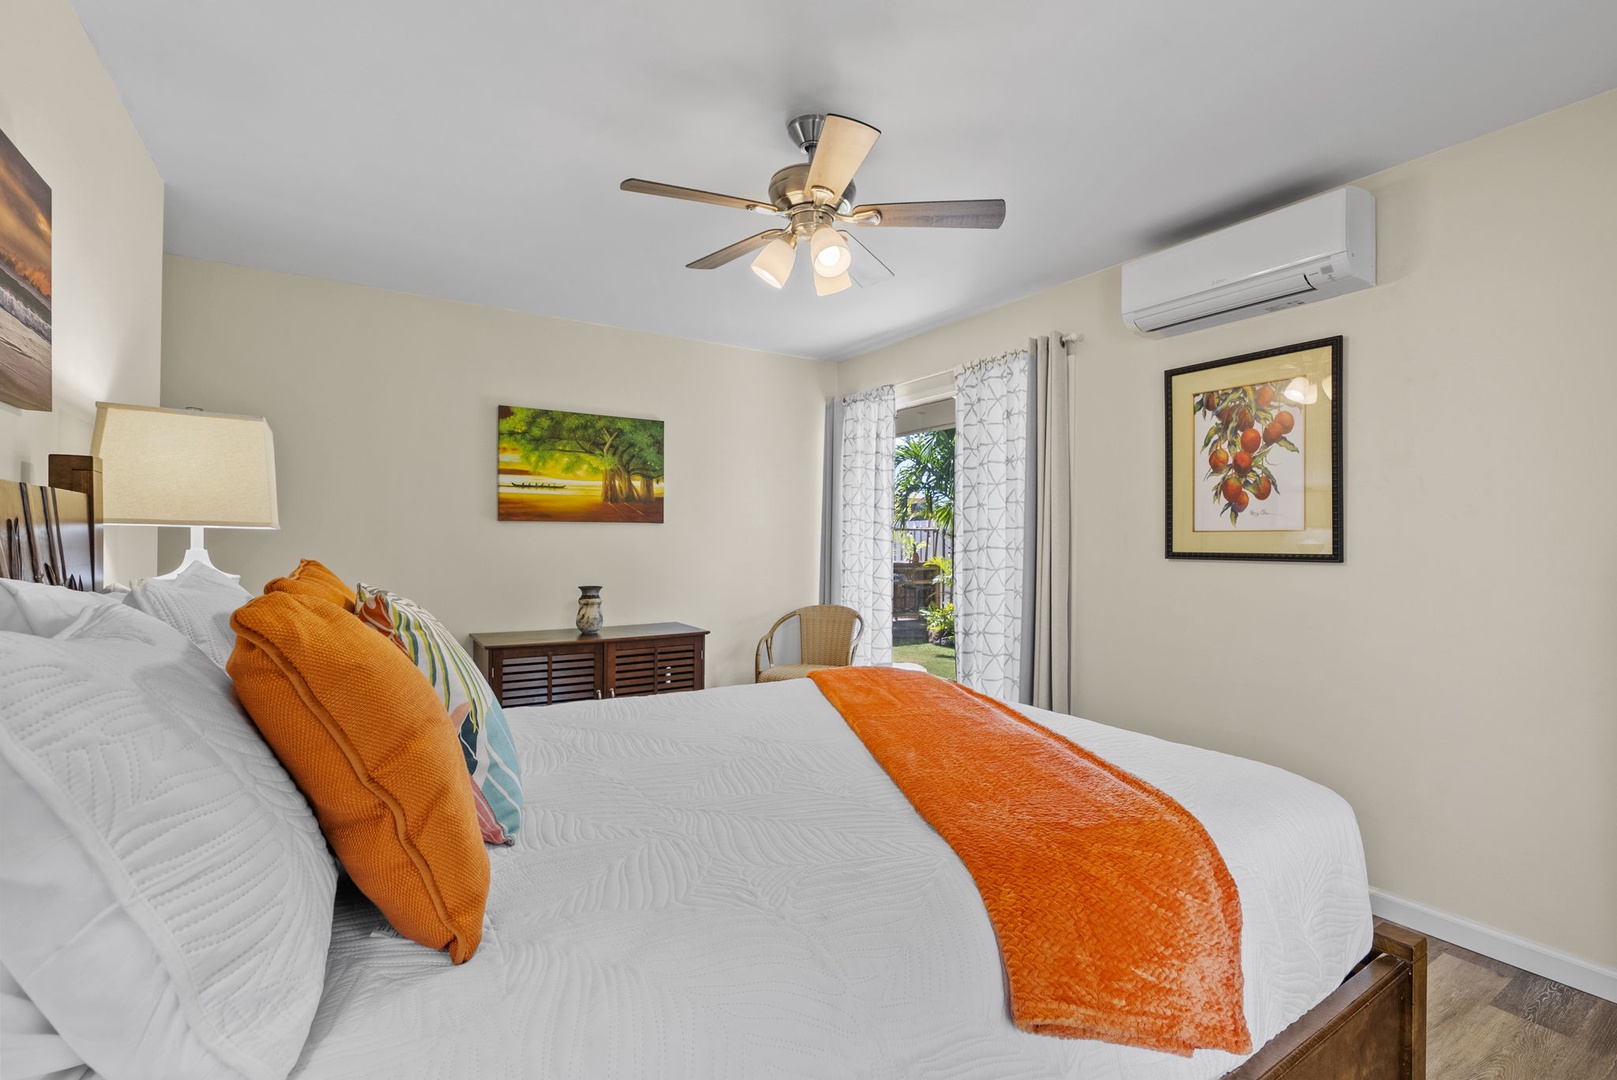 Kailua Vacation Rentals, Hale Aloha - Primary suite boasting a luxurious ambiance, complete with an AC and tranquil views outdoors.